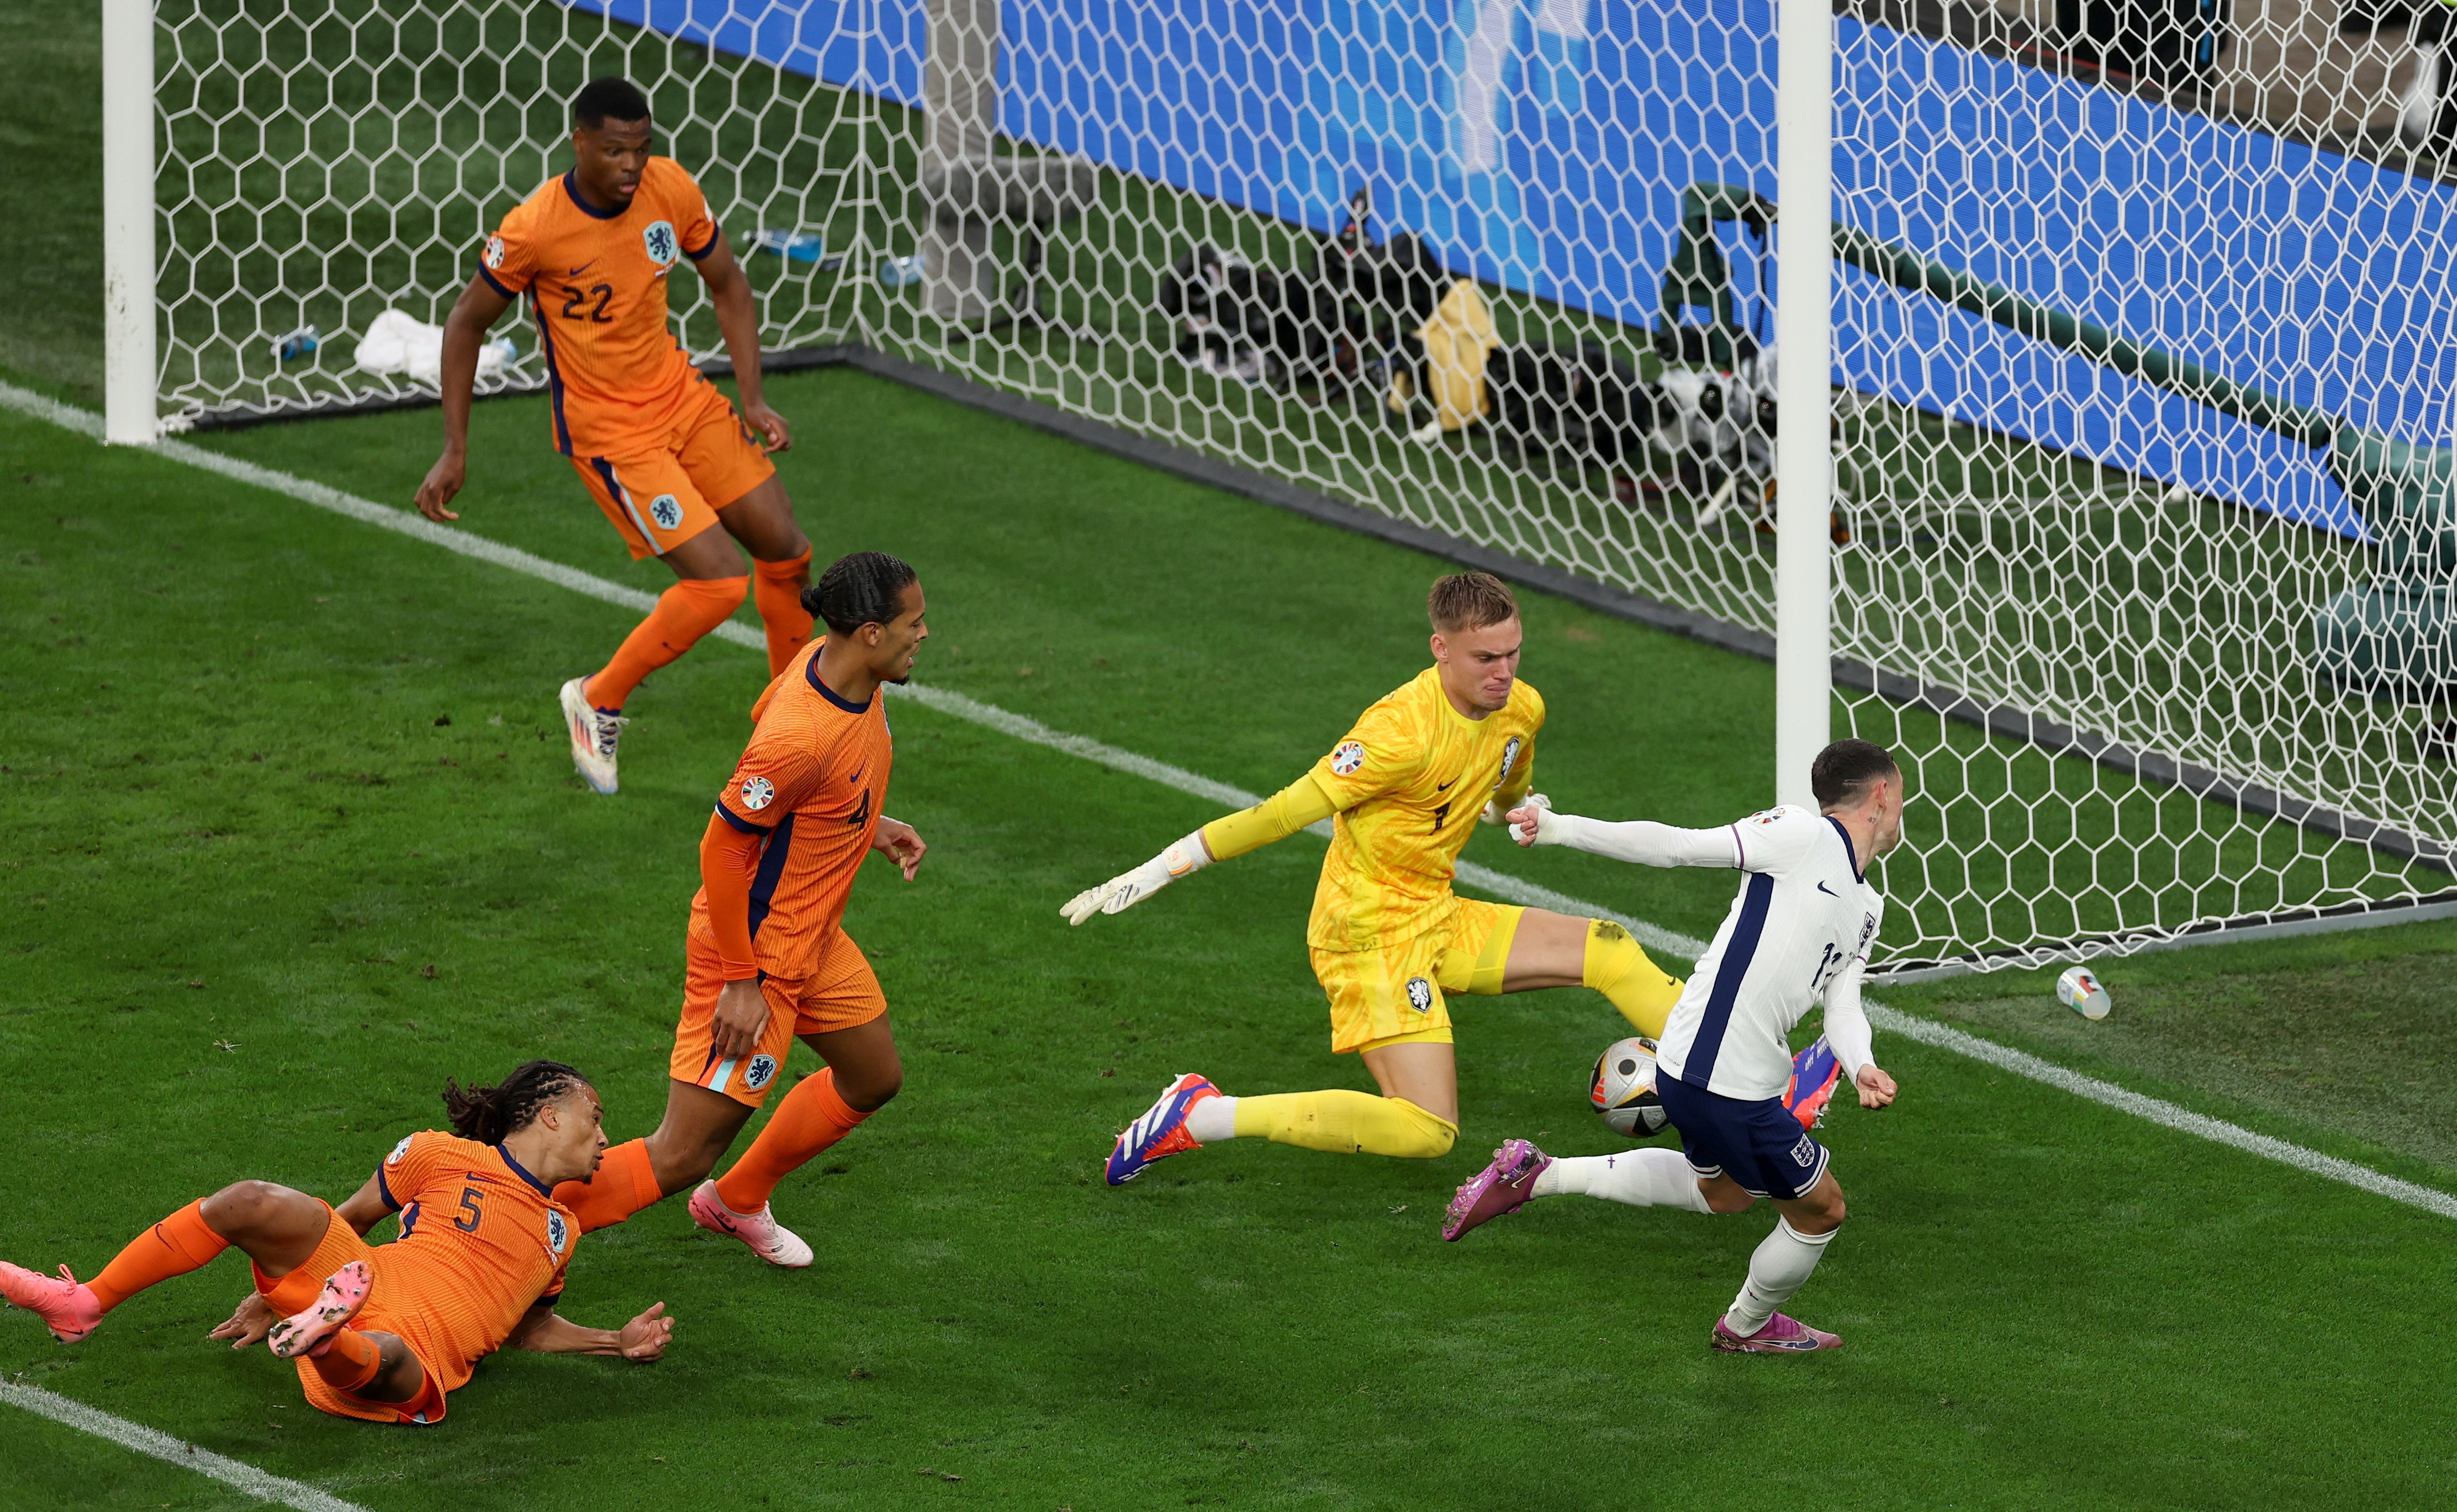 Foden saw one shot cleared off the line and another hit the woodwork